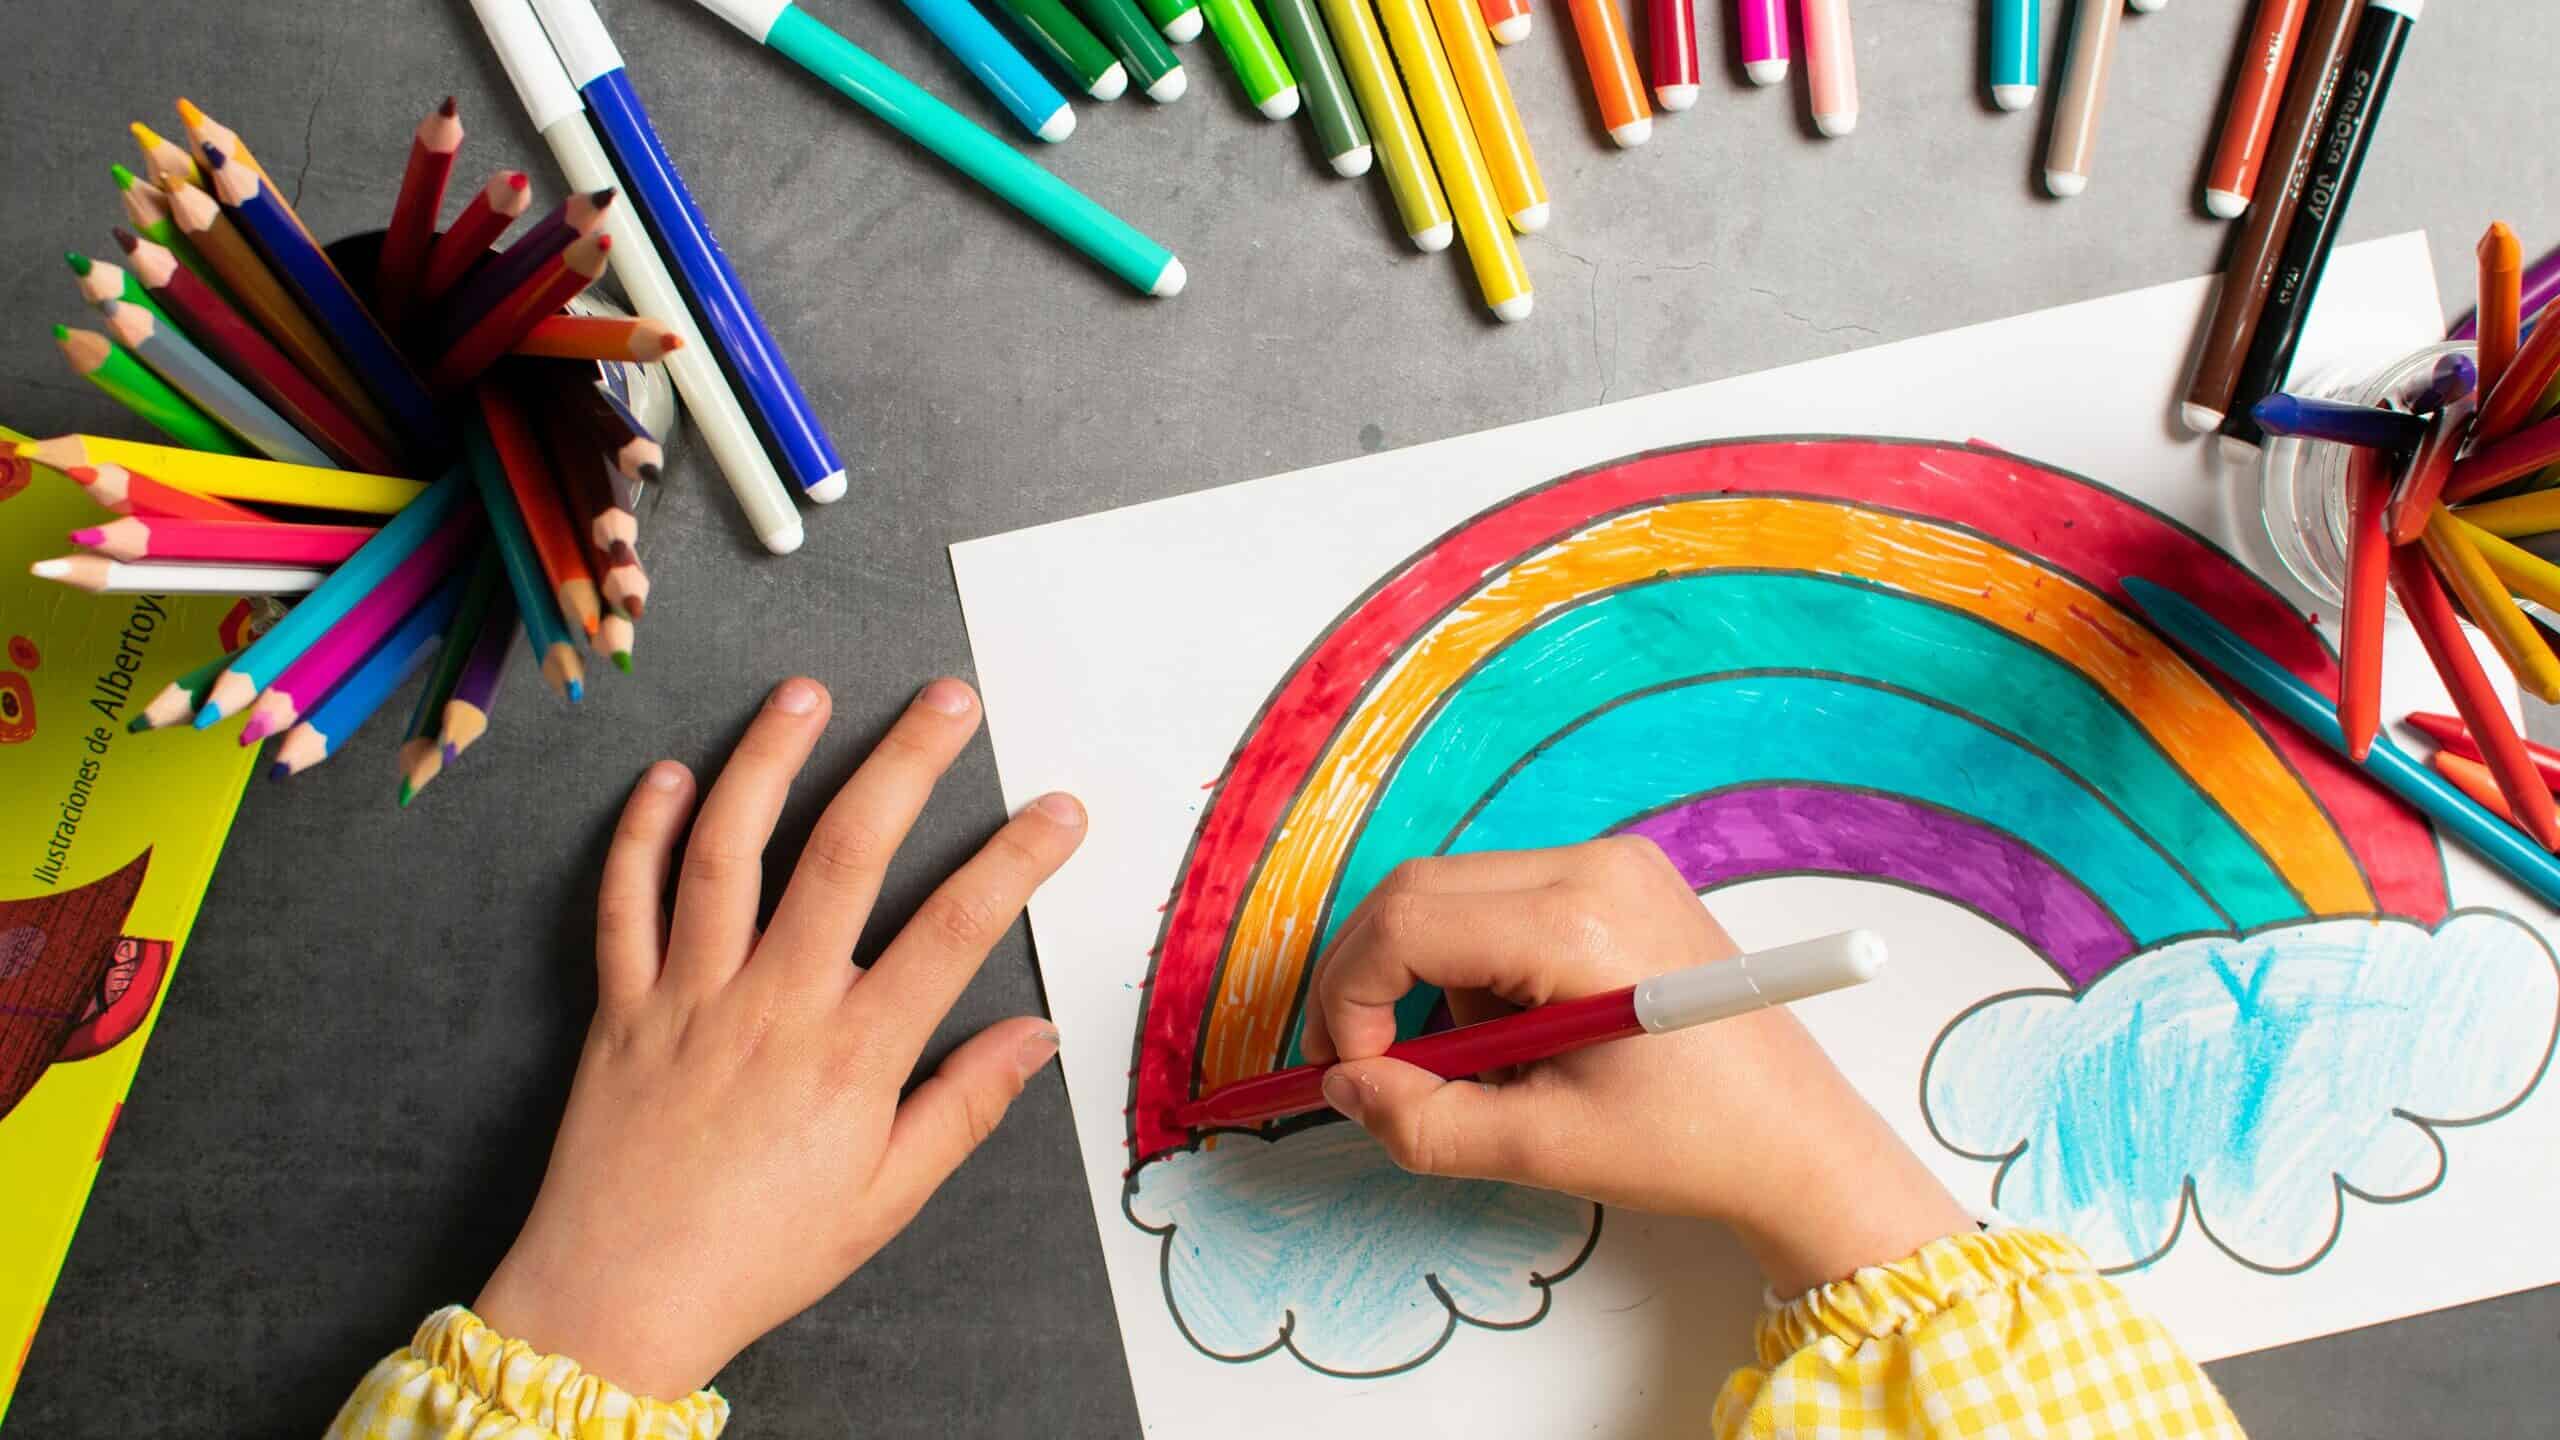 Everyone Should Draw: Drawing Materials For Kids (and Adults)